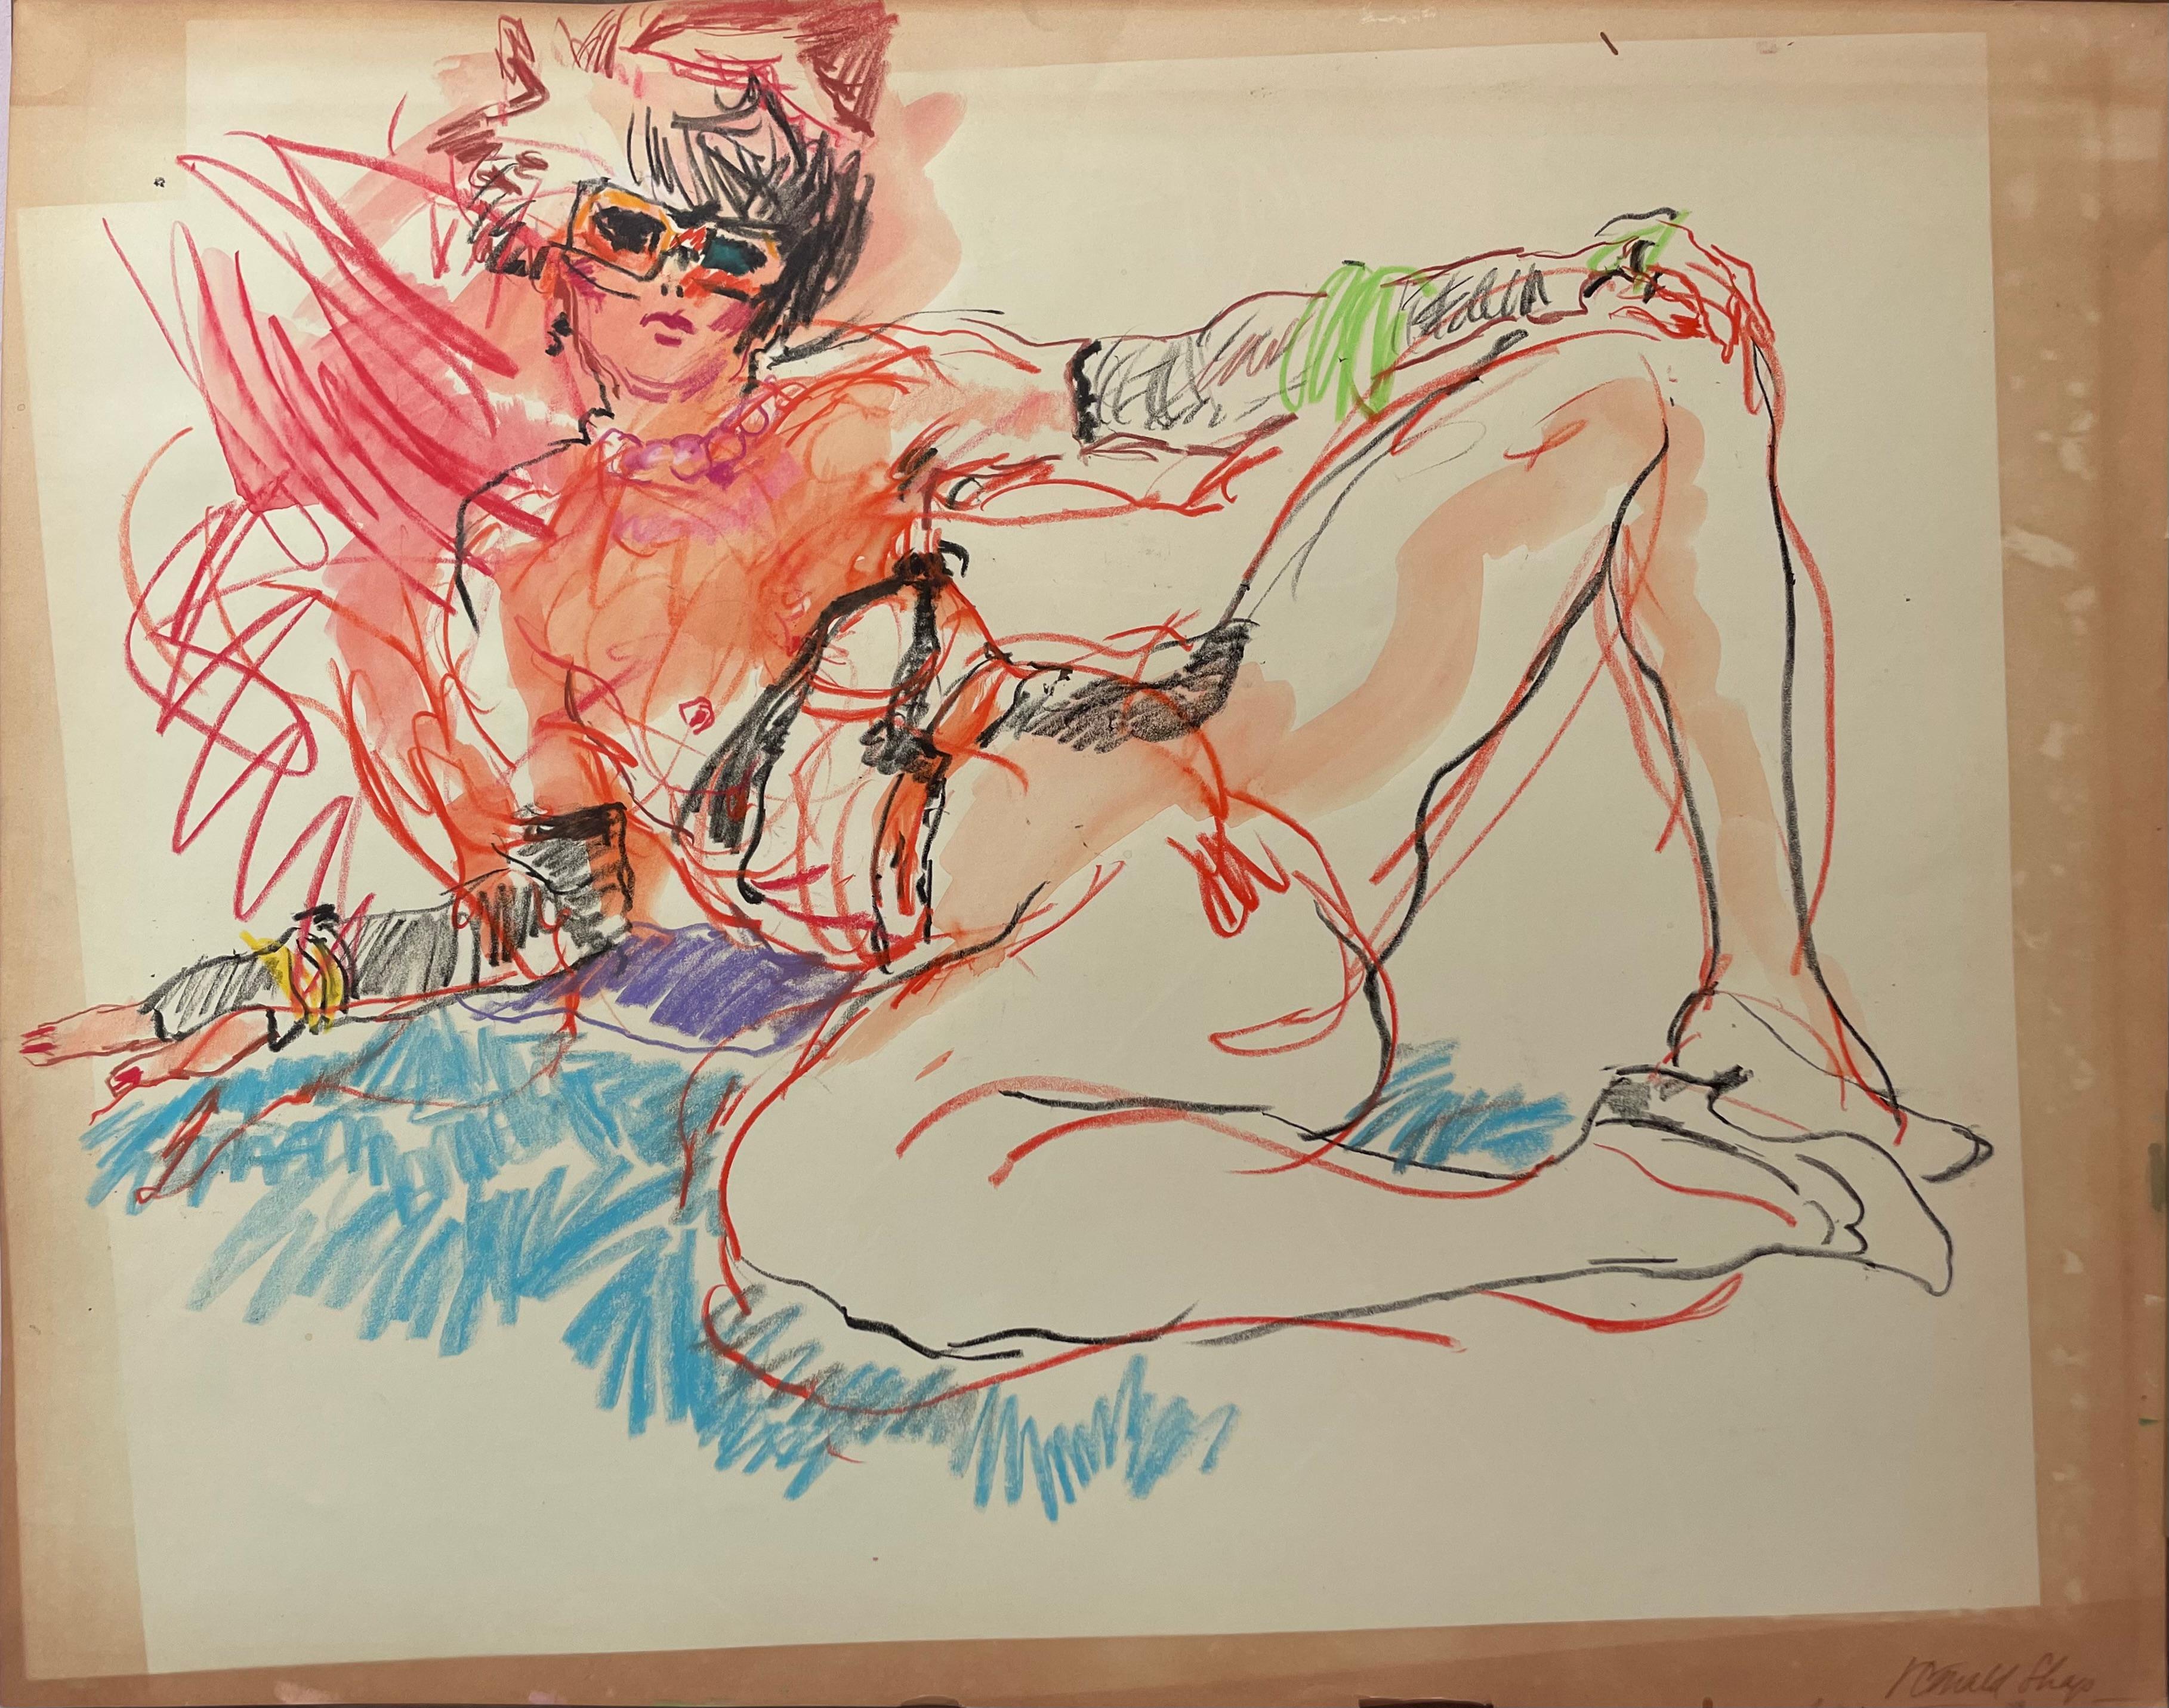 Original oil pastel and gouache figure drawing by celebrated, twentieth-century California impressionist landscape painter, Ronald Shap. Chaotic, rock n roll sketch of nude woman reclining in red, blue and orange. 19x24 inches on paper.